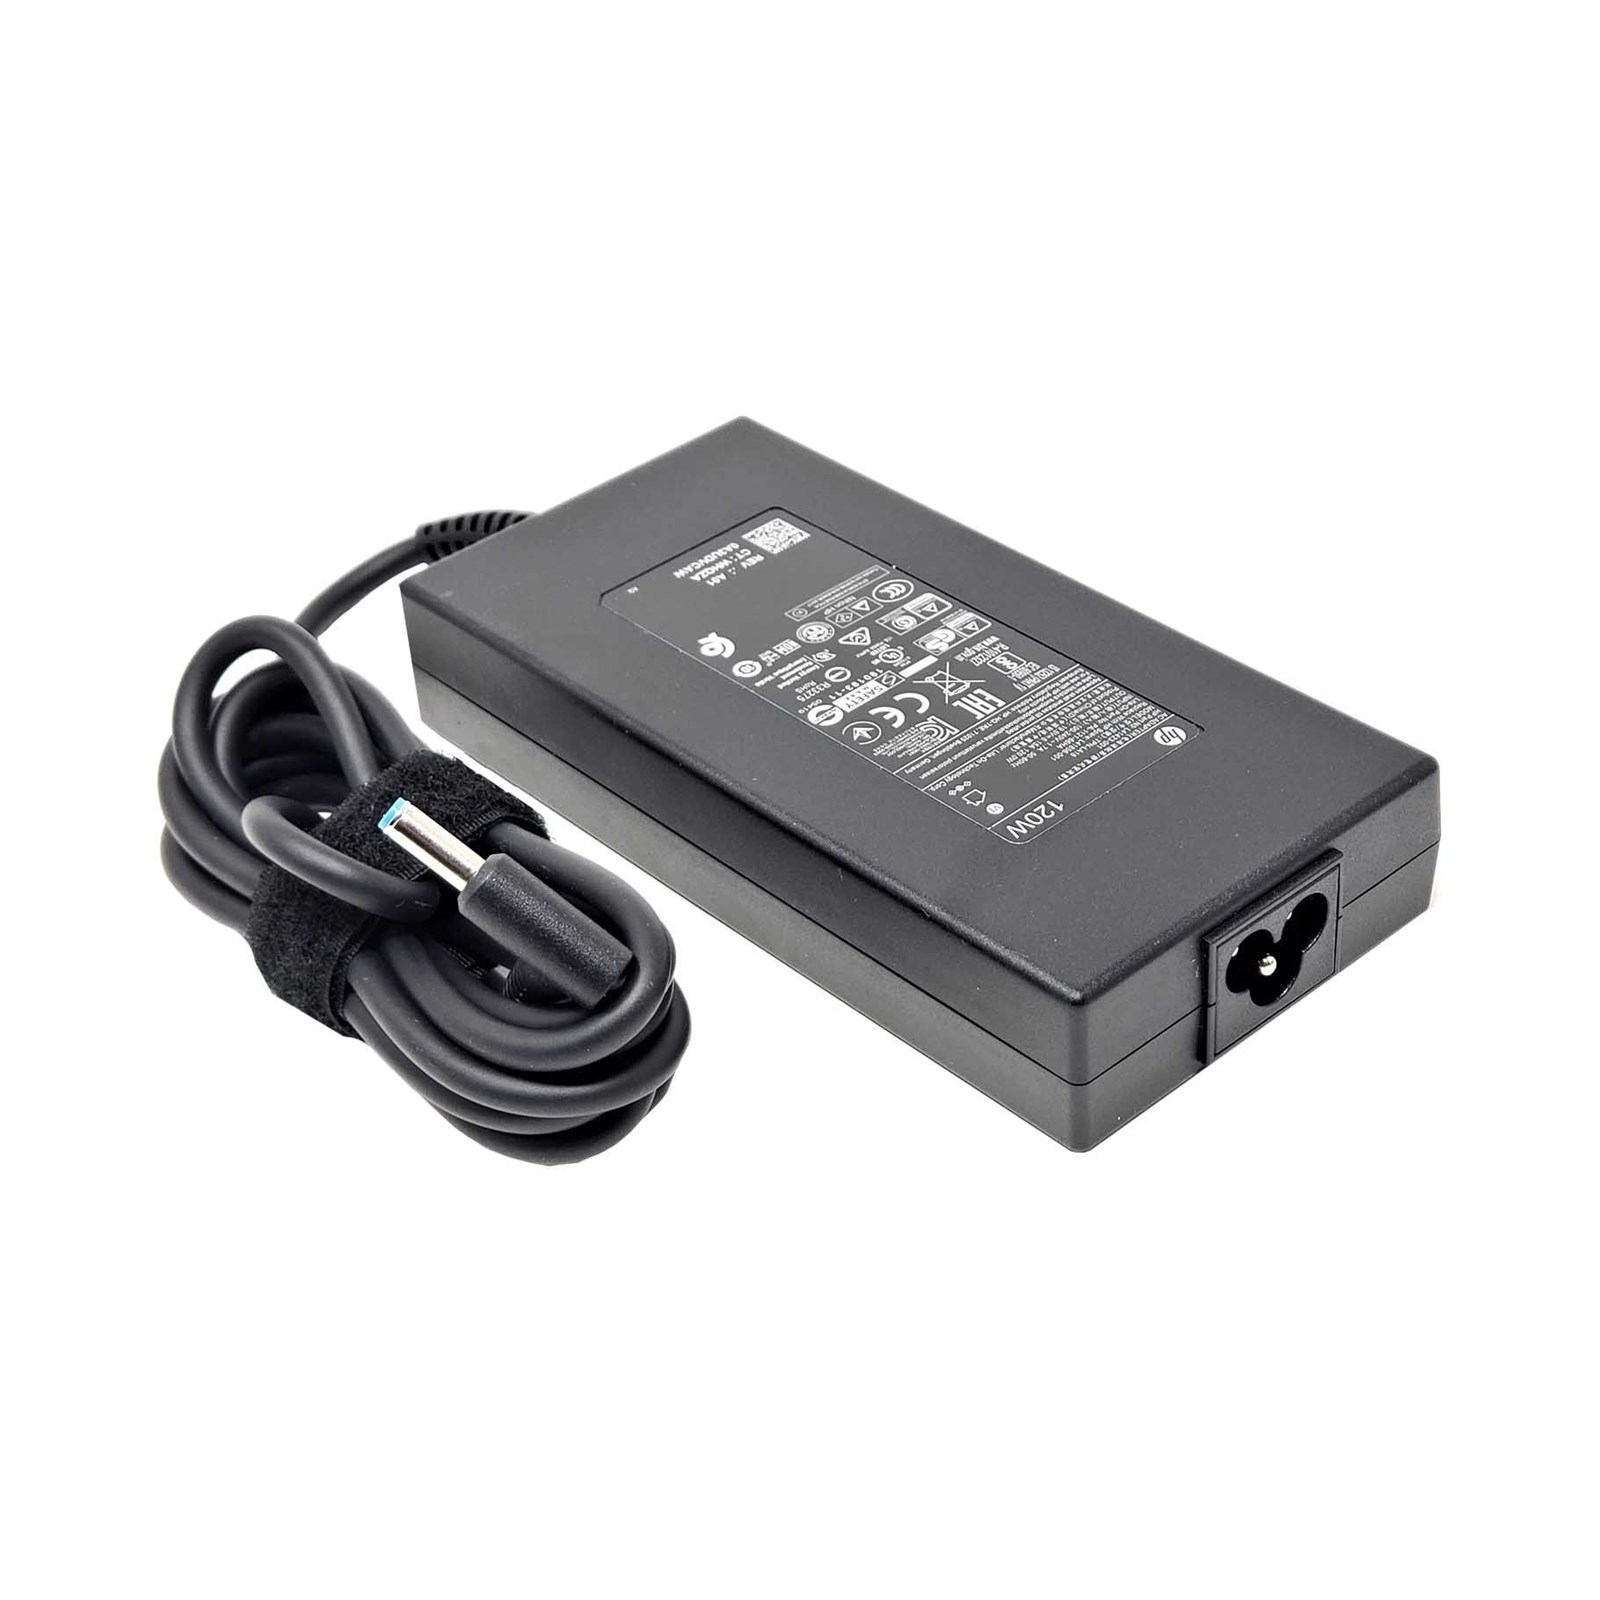 Photos - Cable (video, audio, USB) HP L41856-001 120W Laptop Power Adapter in Black 